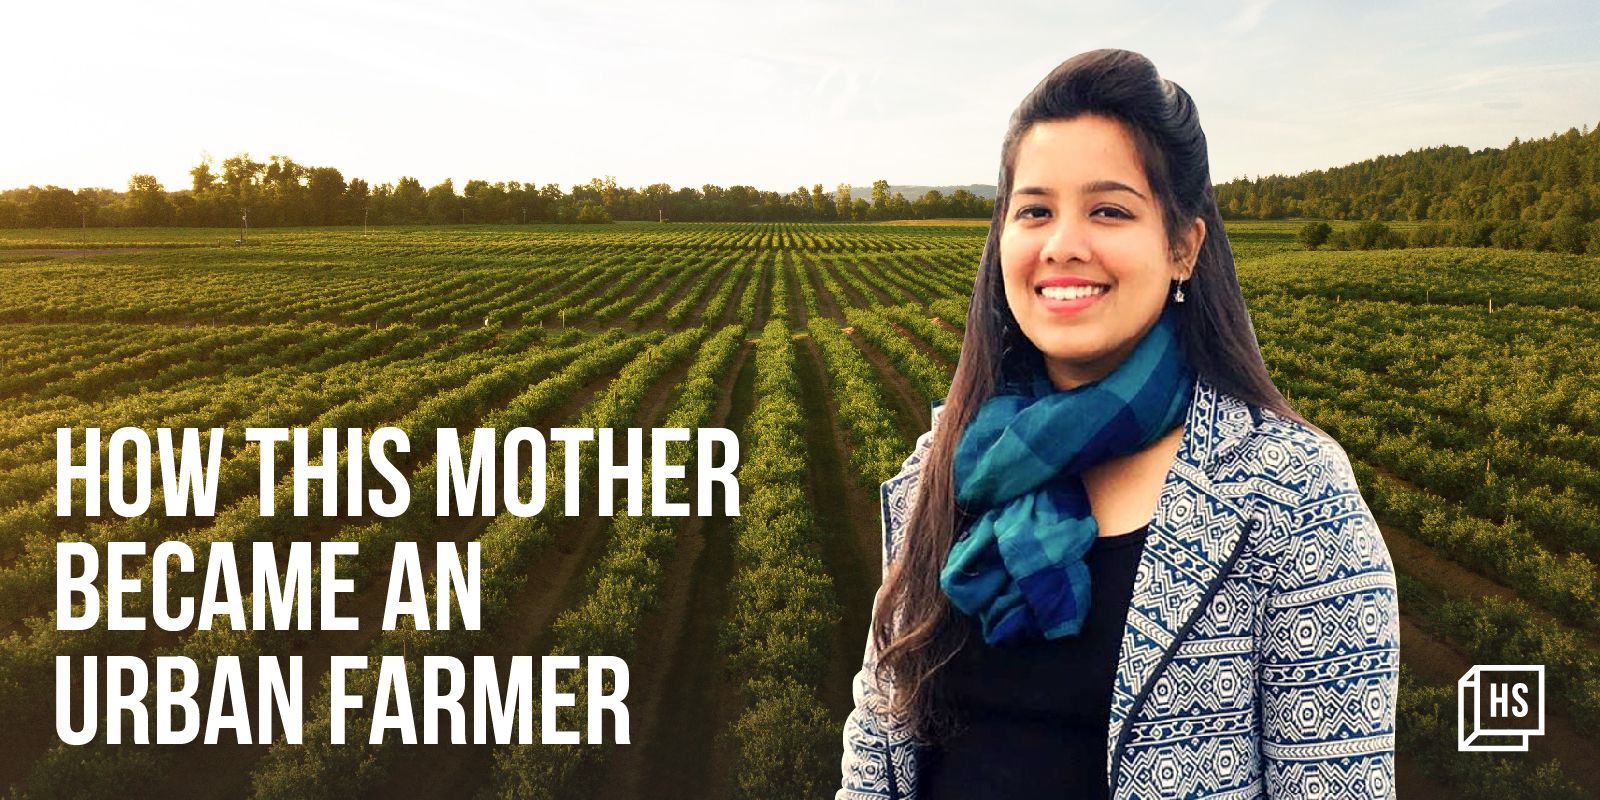 This mother turned into an urban farmer to provide chemical-free food to her children

